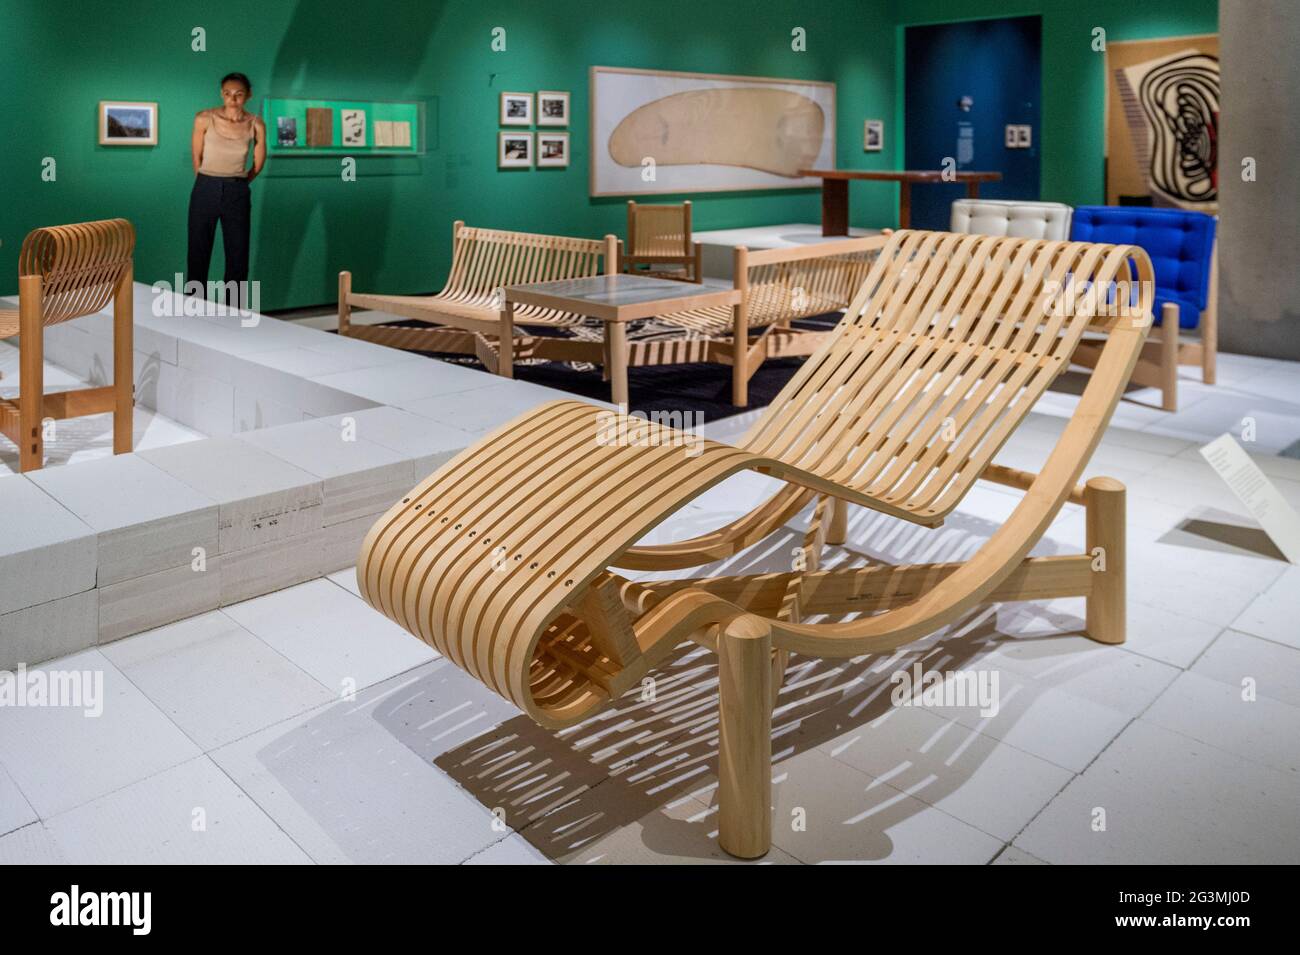 Charlotte Perriand: The Modern Life - Exhibitions - The Design Edit